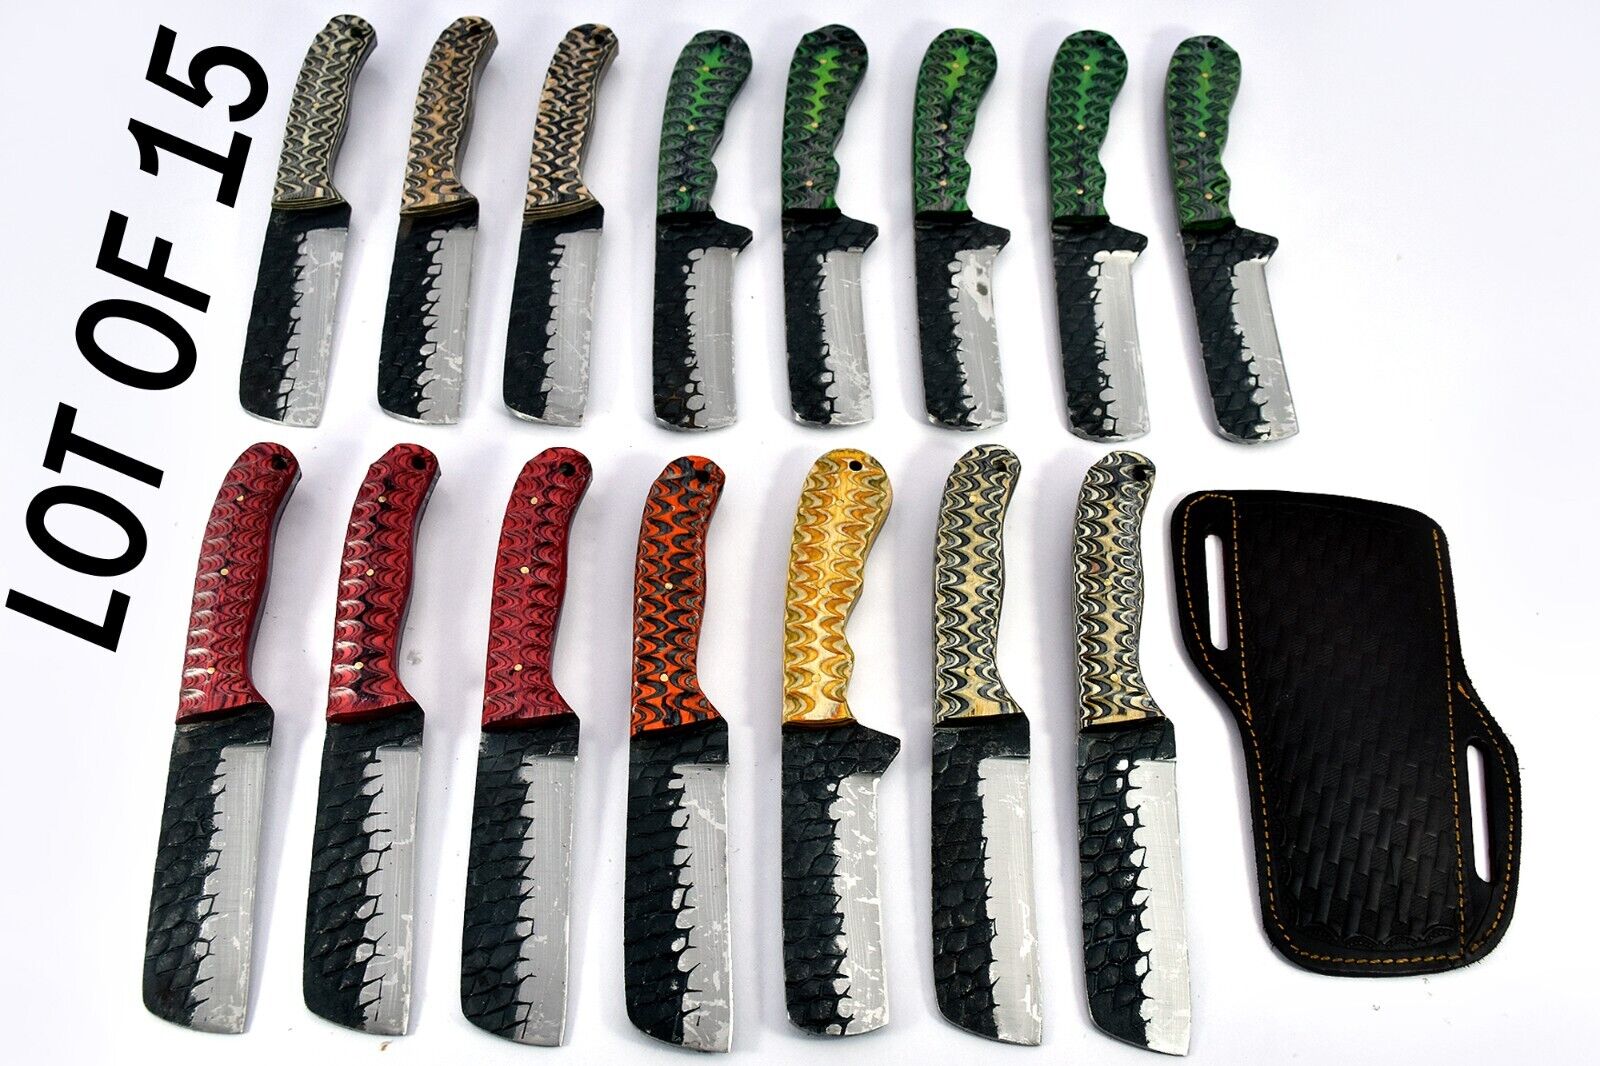 15 pieces Carbon steel Bull cuter knives with leather sheath UM-5046-A